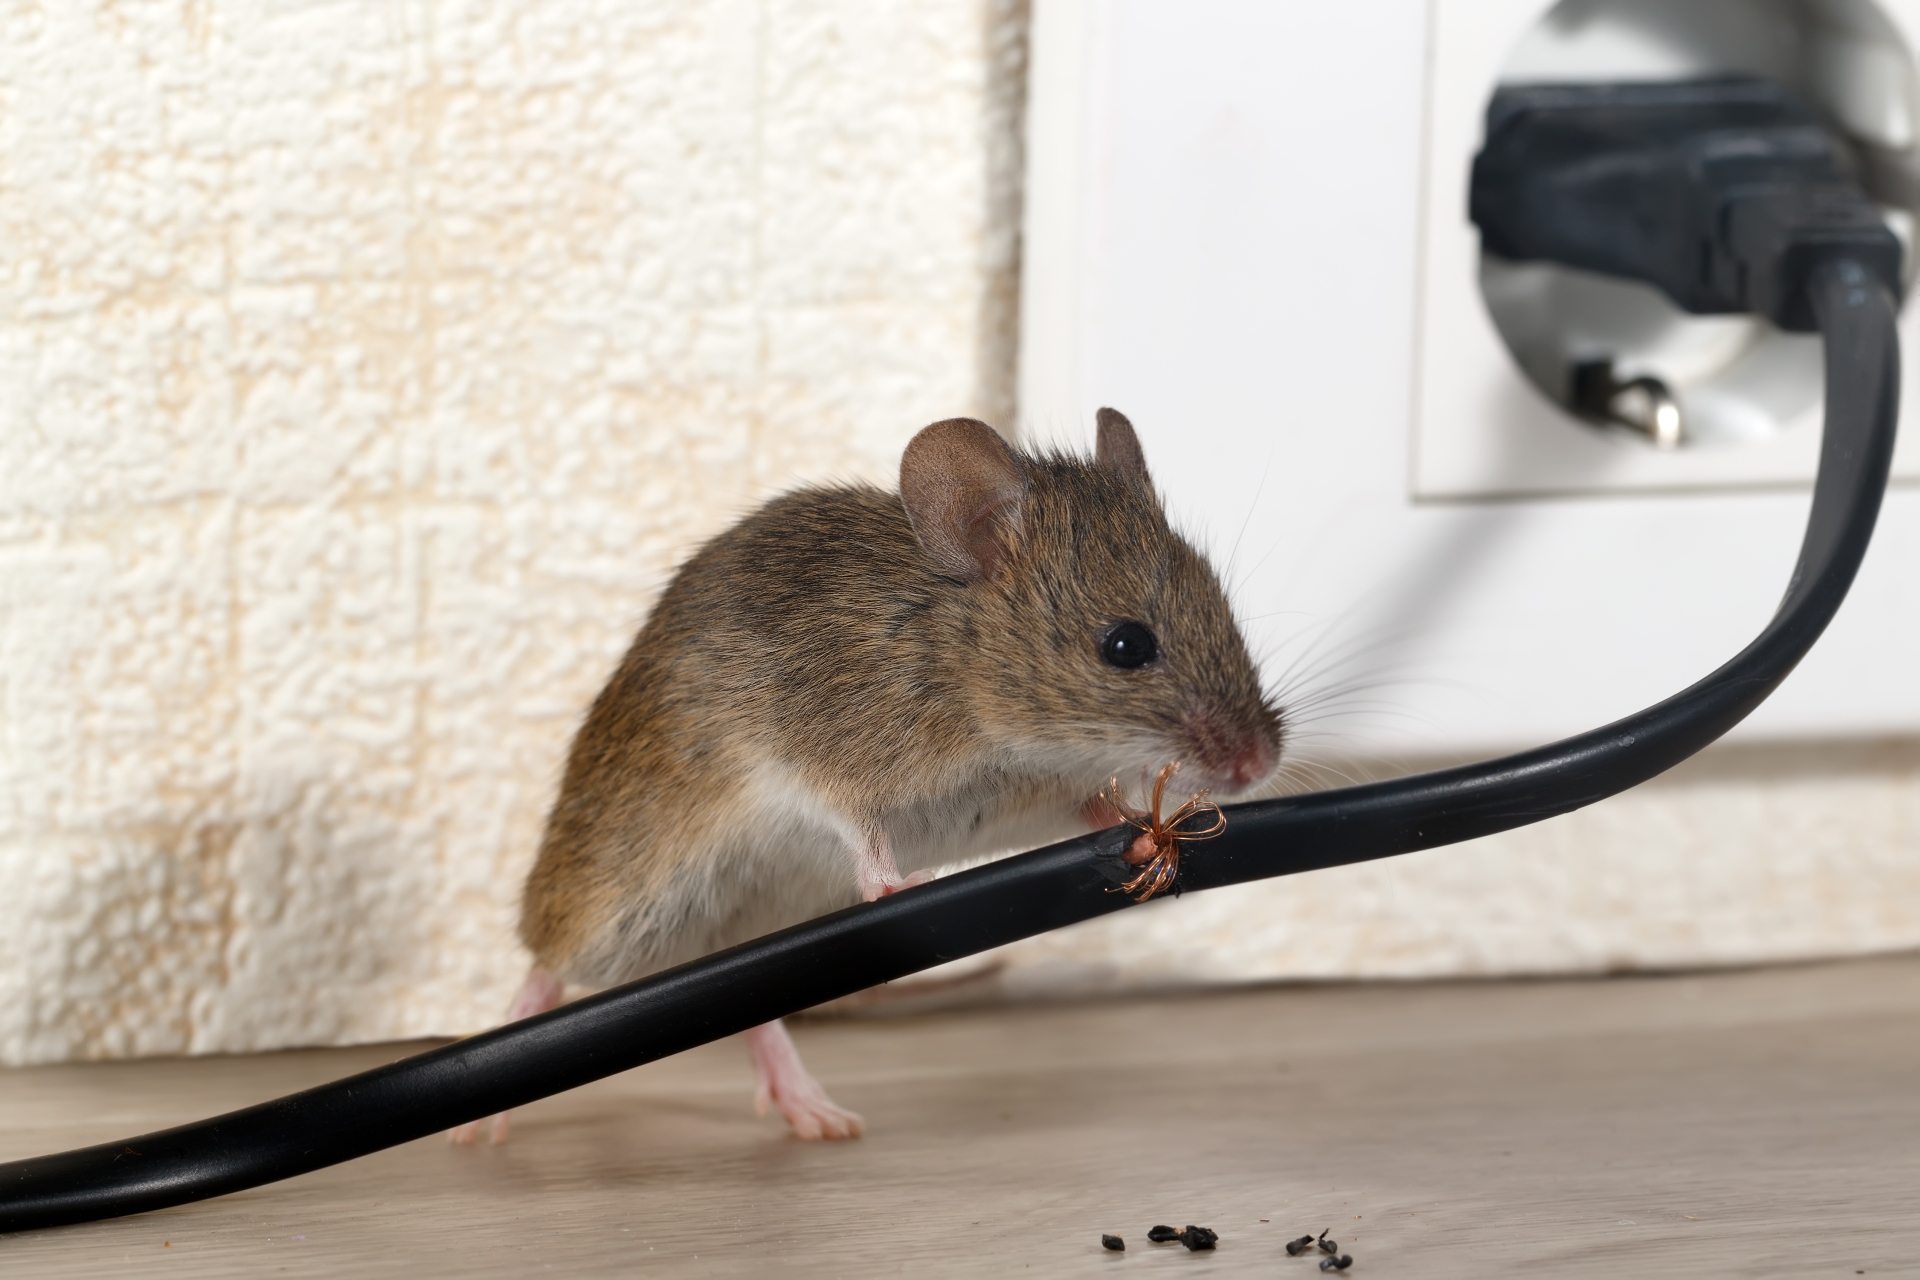 Mice Infestation, Pest Control in Chiswick, W4. Call Now 020 8166 9746